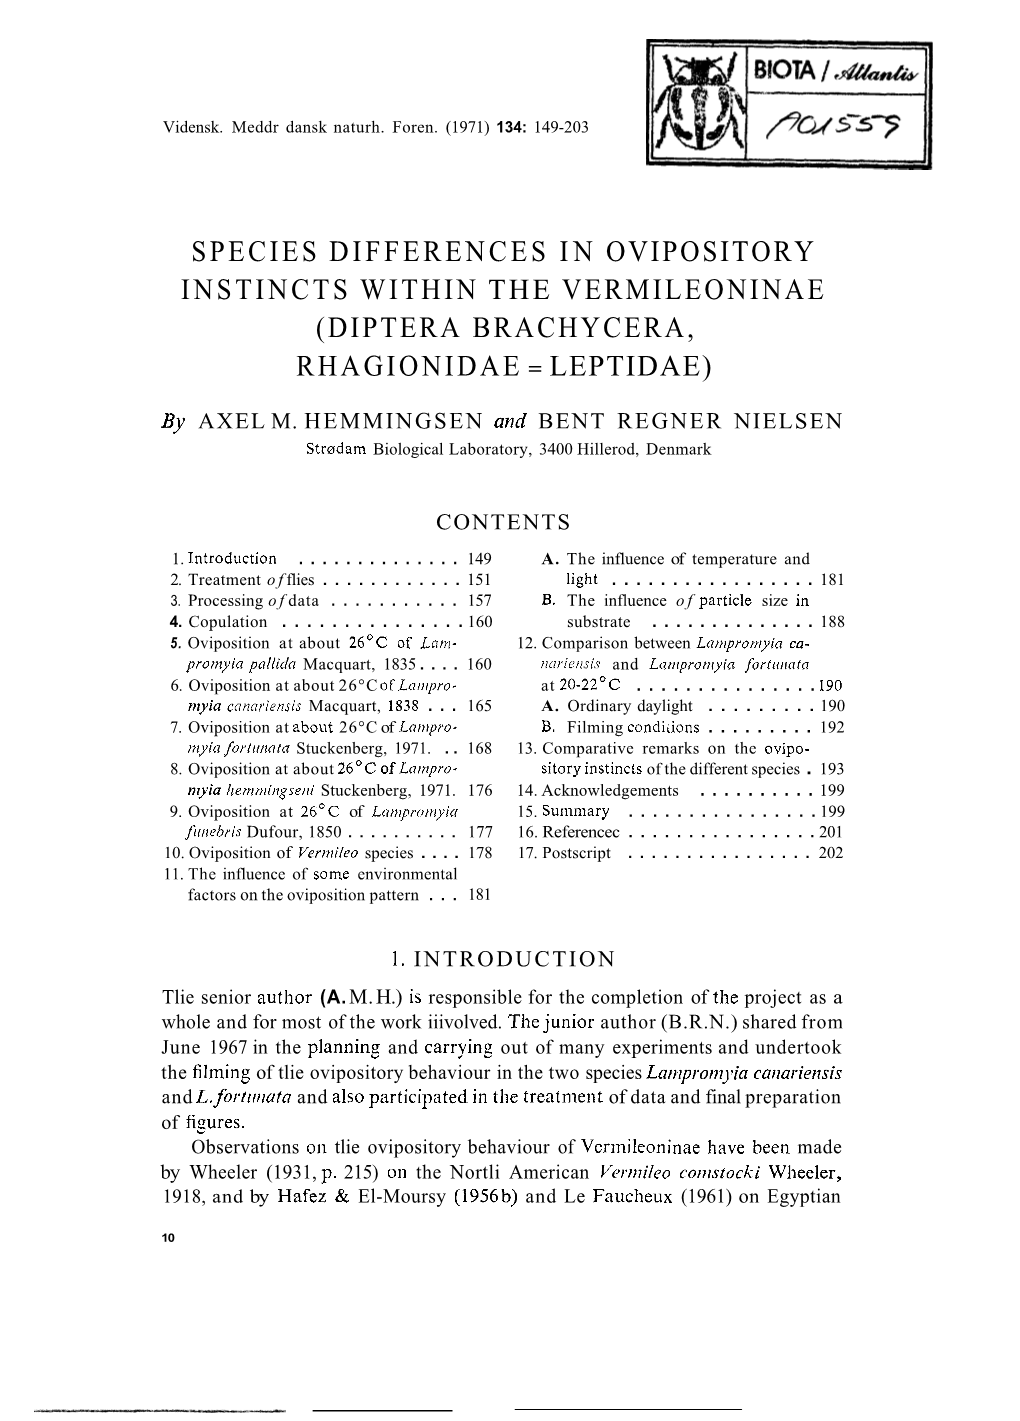 Species Differences in Ovipository Instincts Within the Vermileoninae (Diptera Brachycera, Rhagionidae = Leptidae)